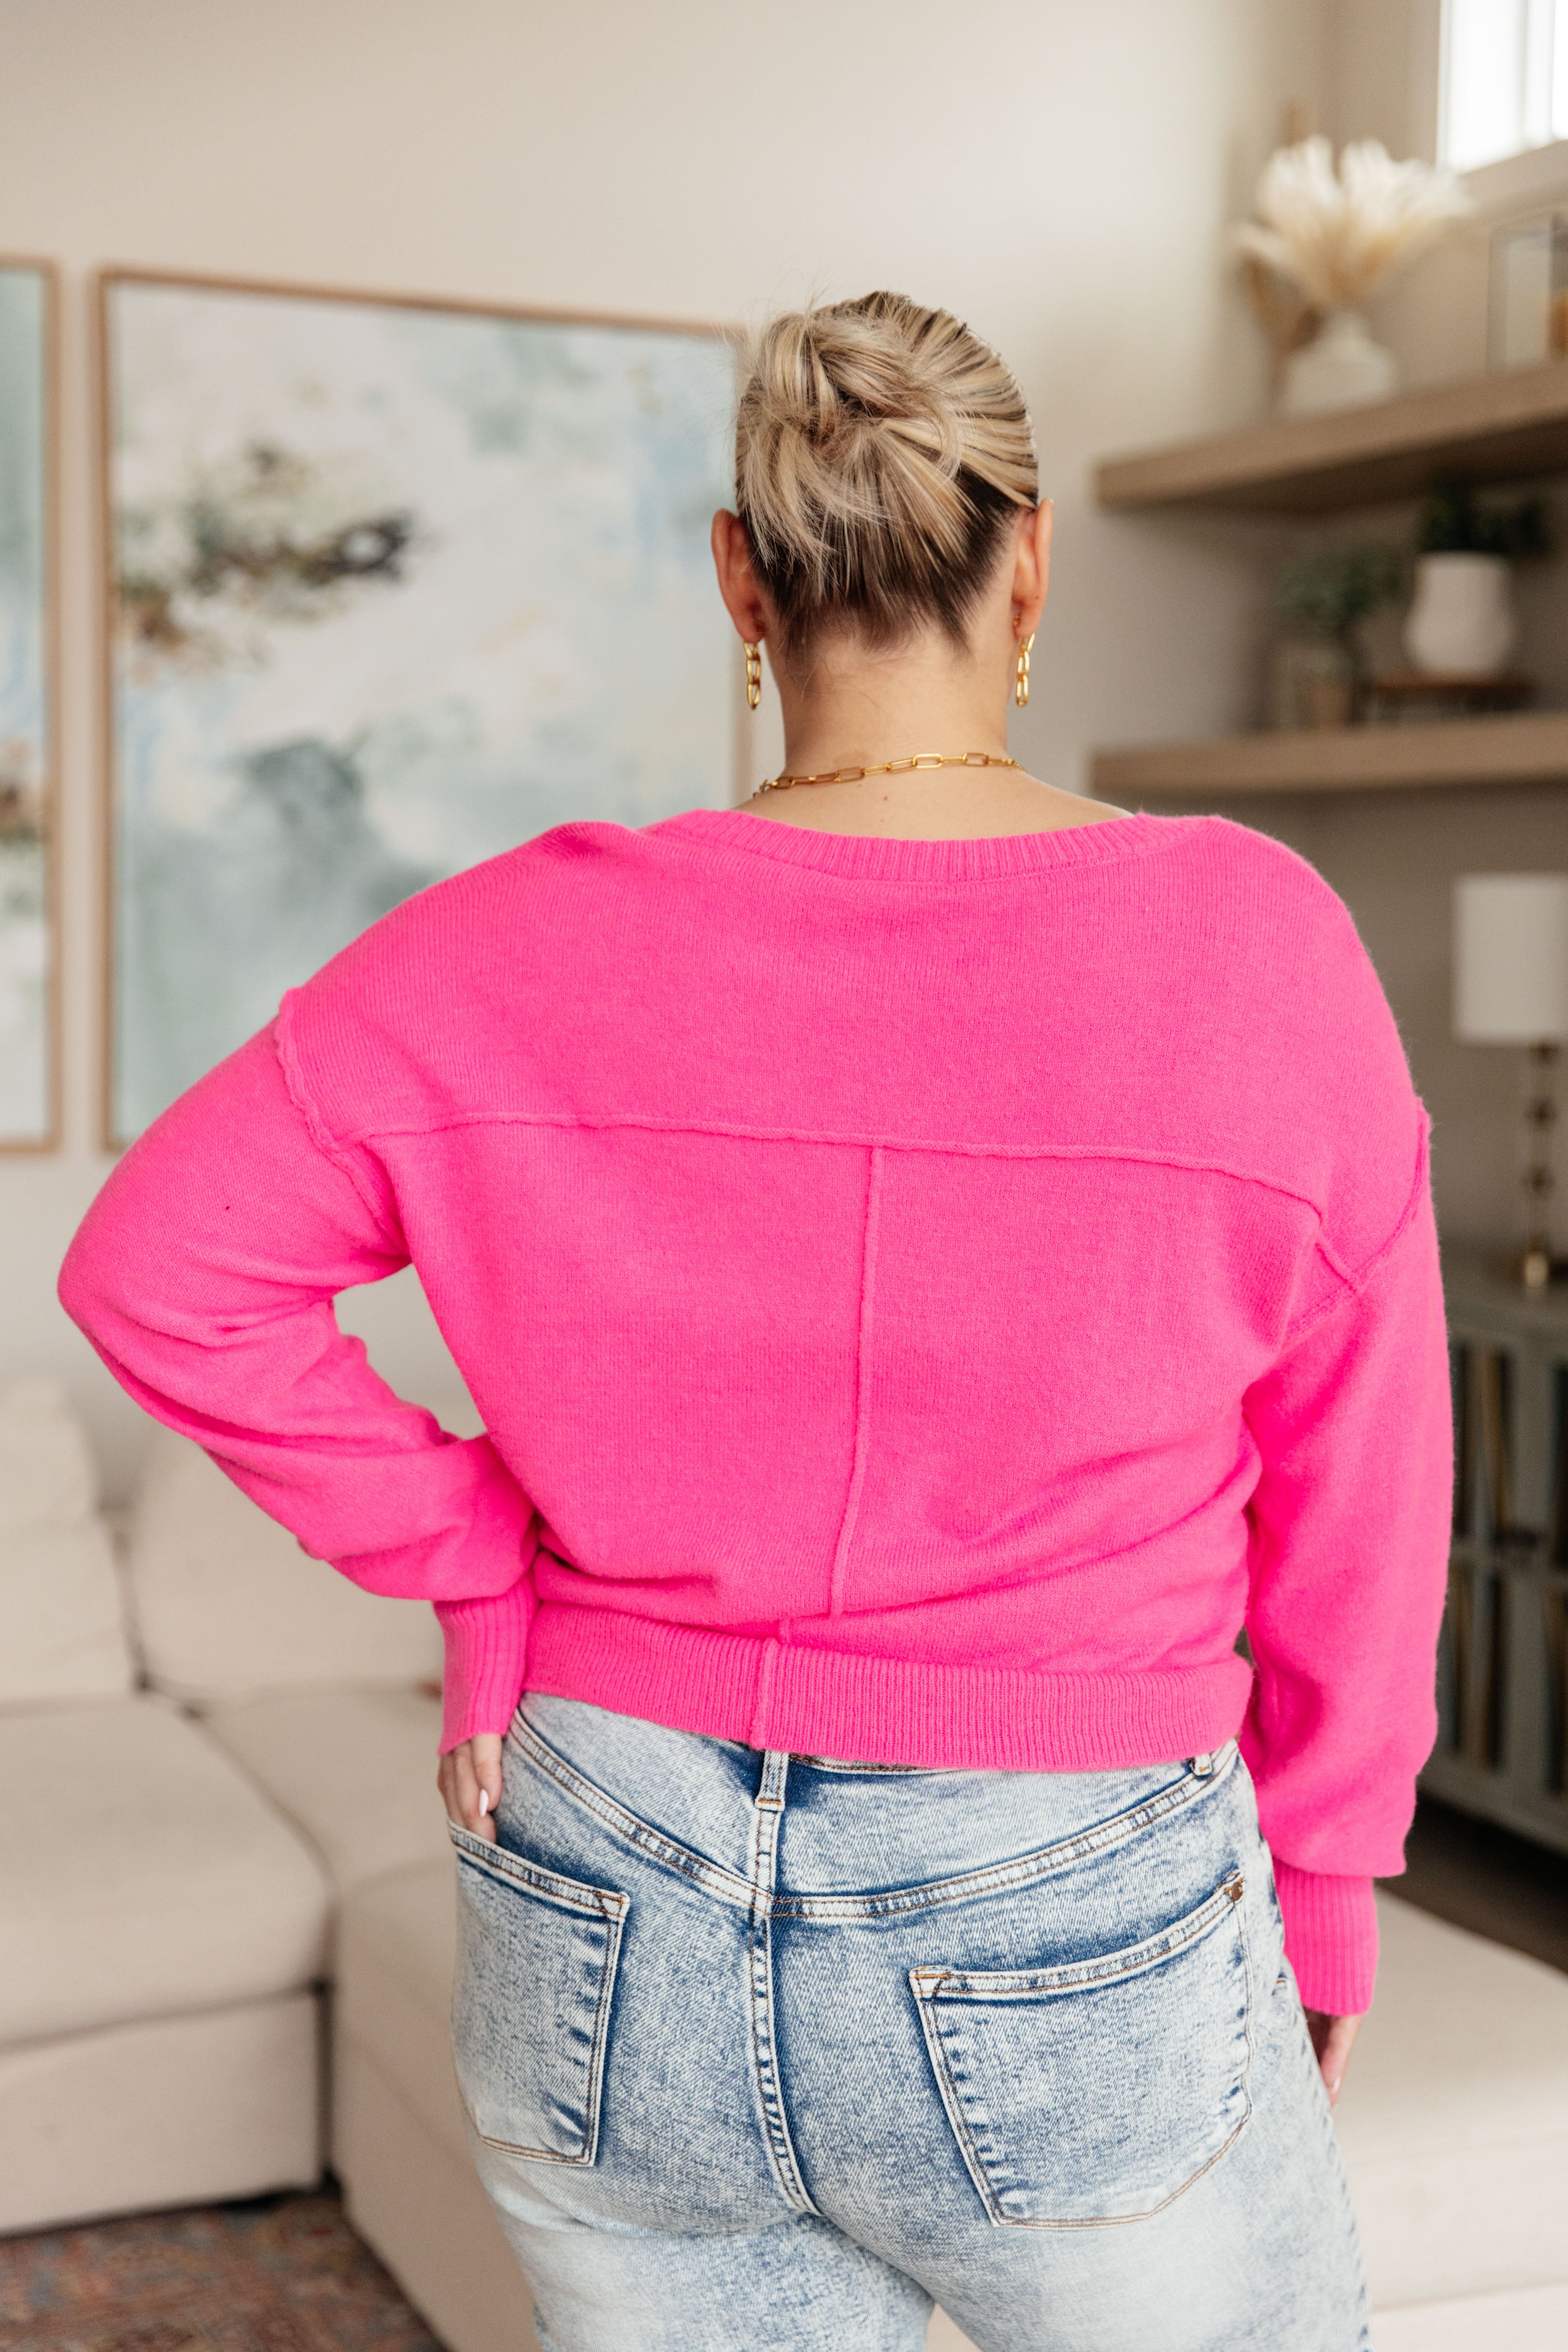 Back to Life V-Neck Sweater in Pink Tops Ave Shops   